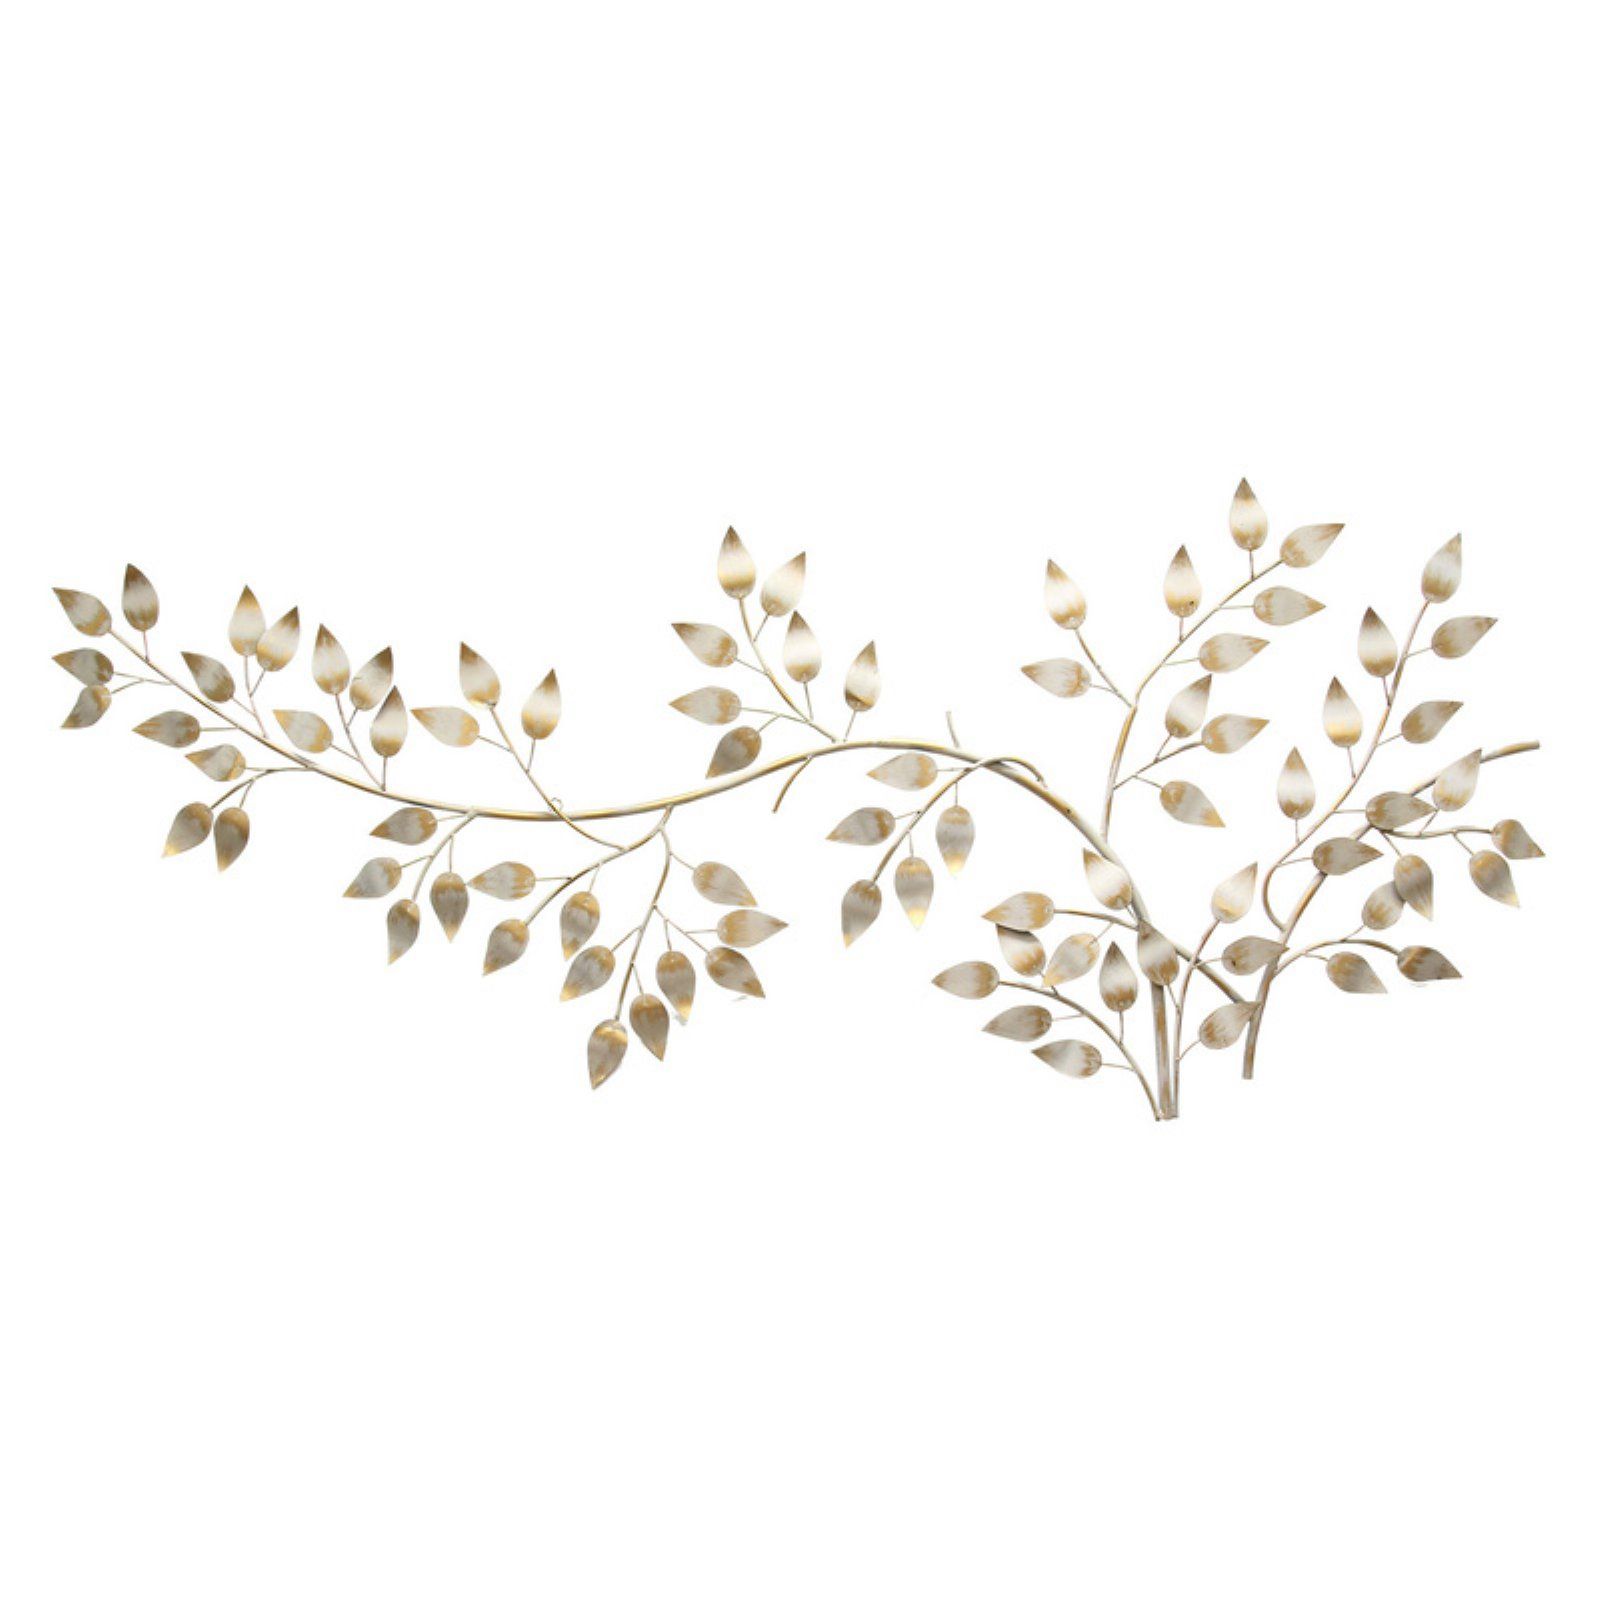 Stratton Home Decor Brushed Gold Flowing Leaves Wall Decor – Walmart Pertaining To Newest Gold Leaves Wall Art (View 19 of 20)